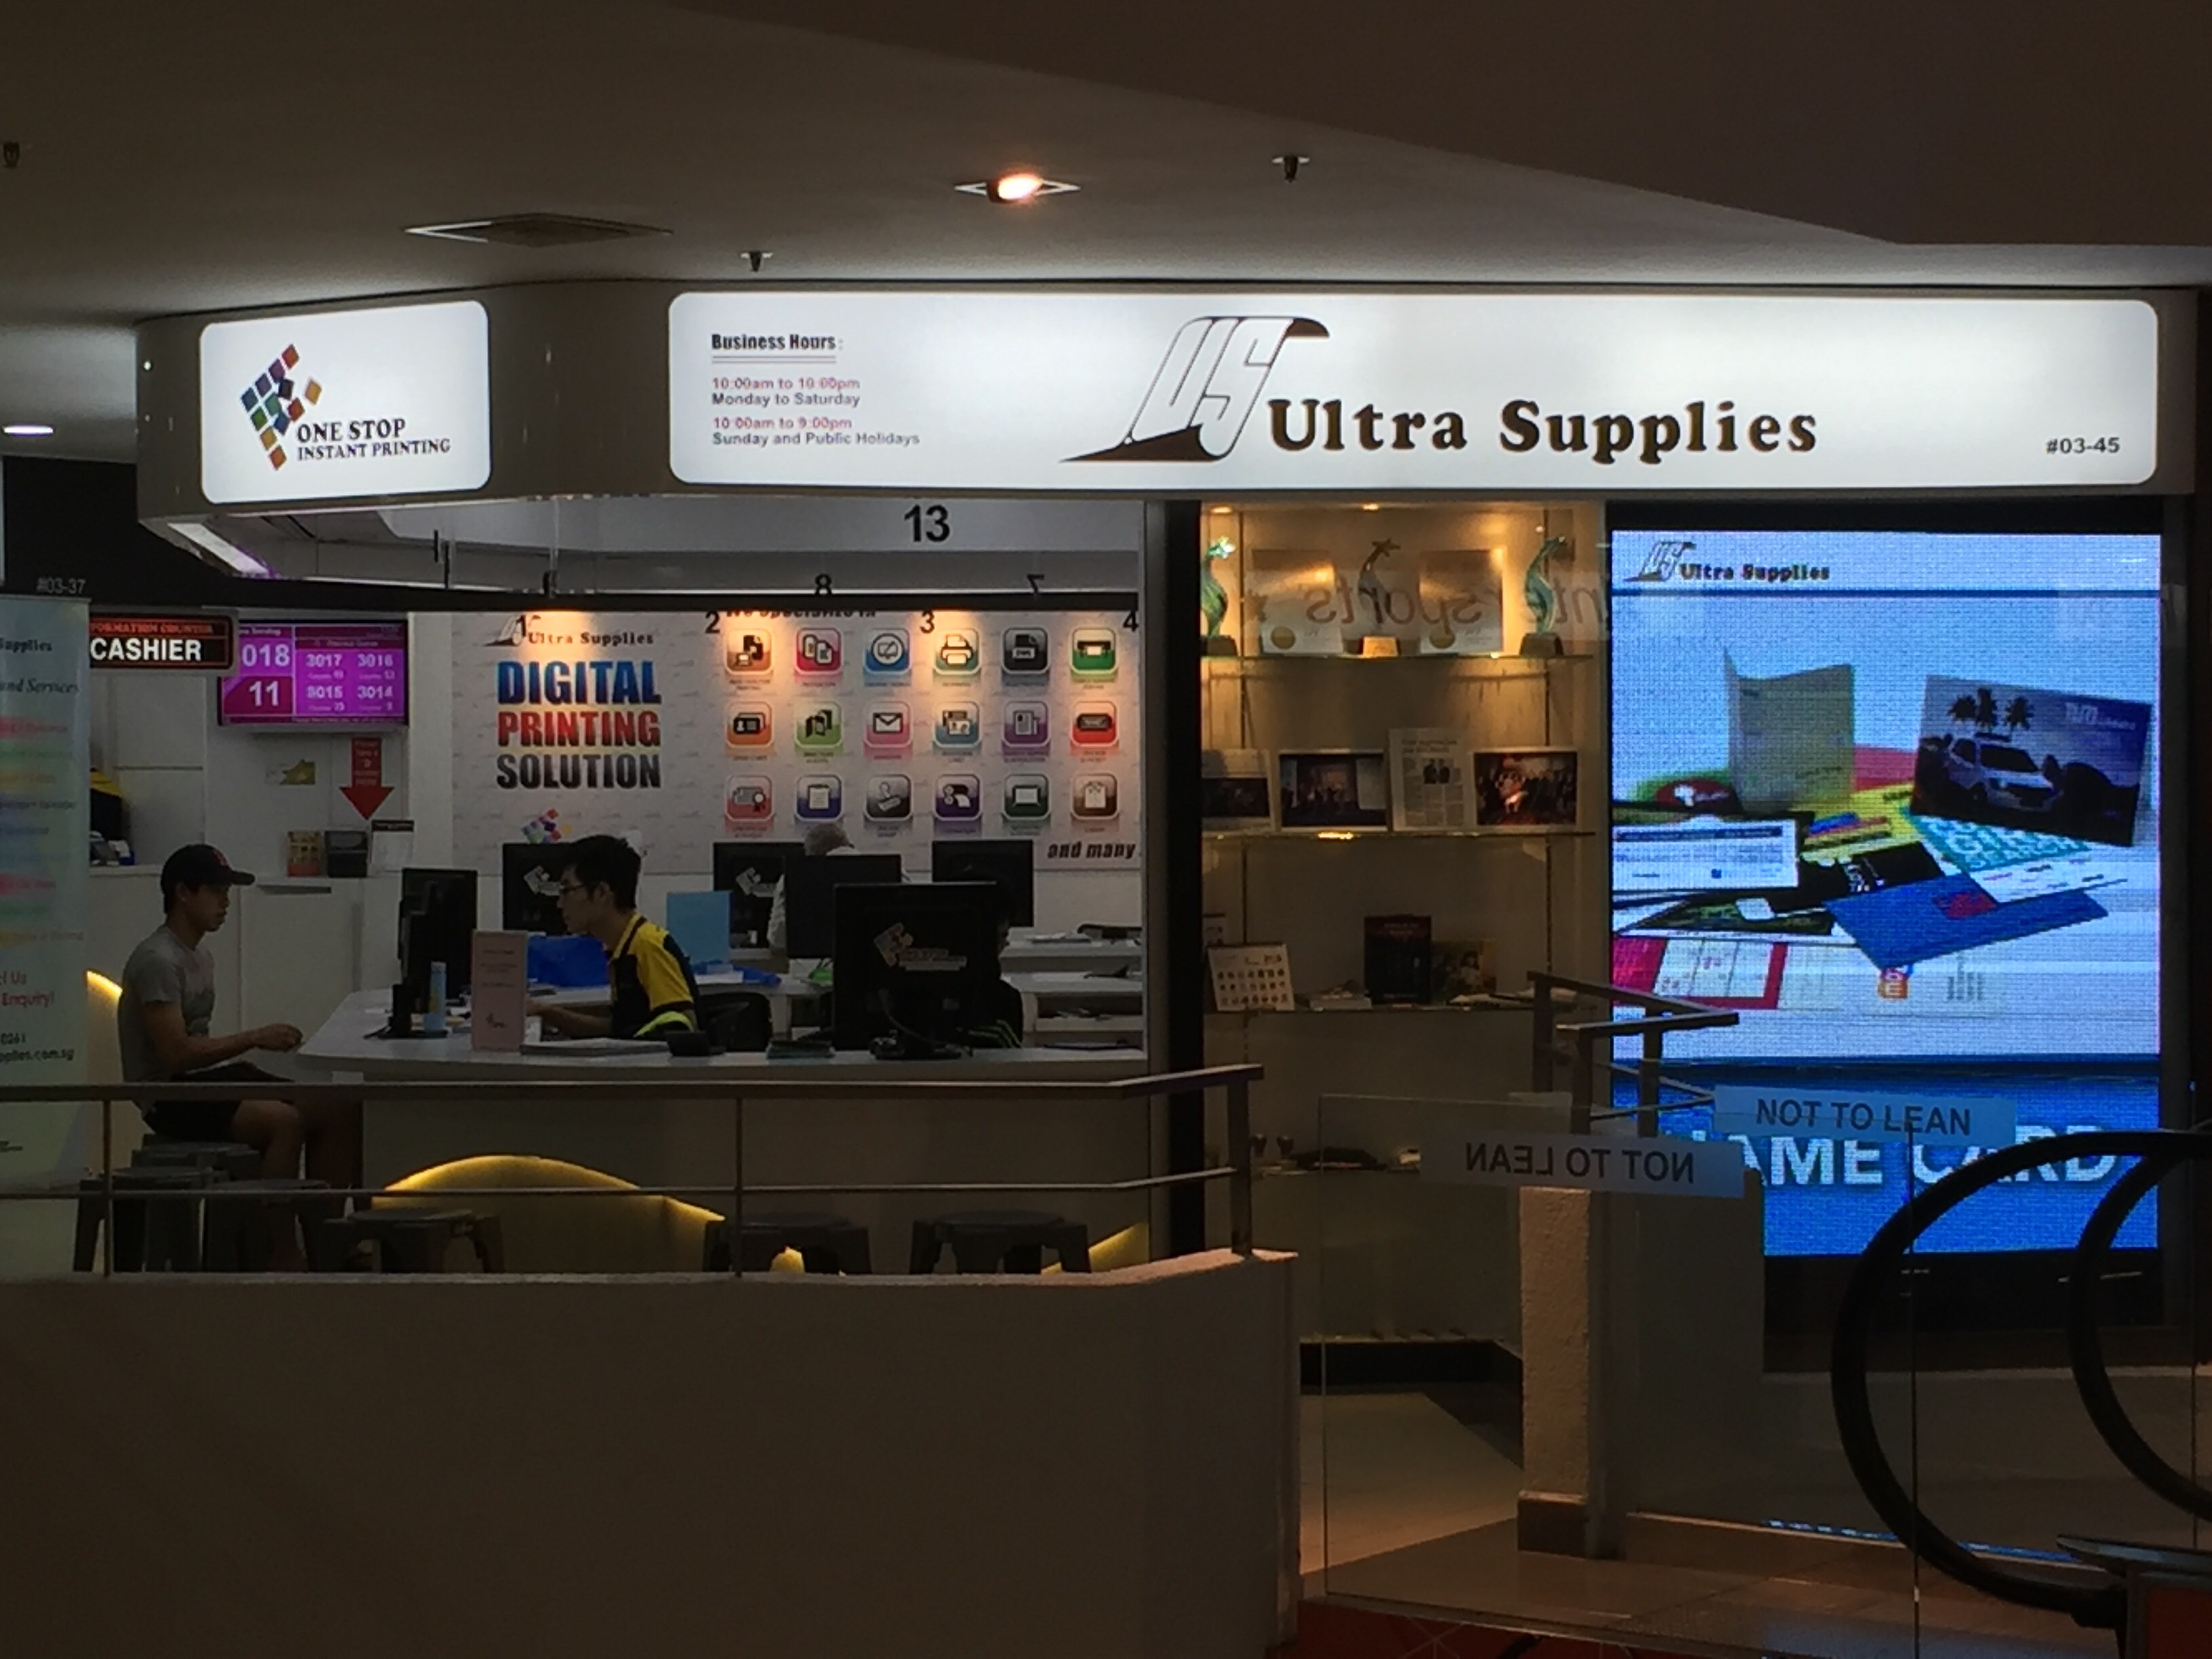  Ultra Supplies -Printing Services Singapore   